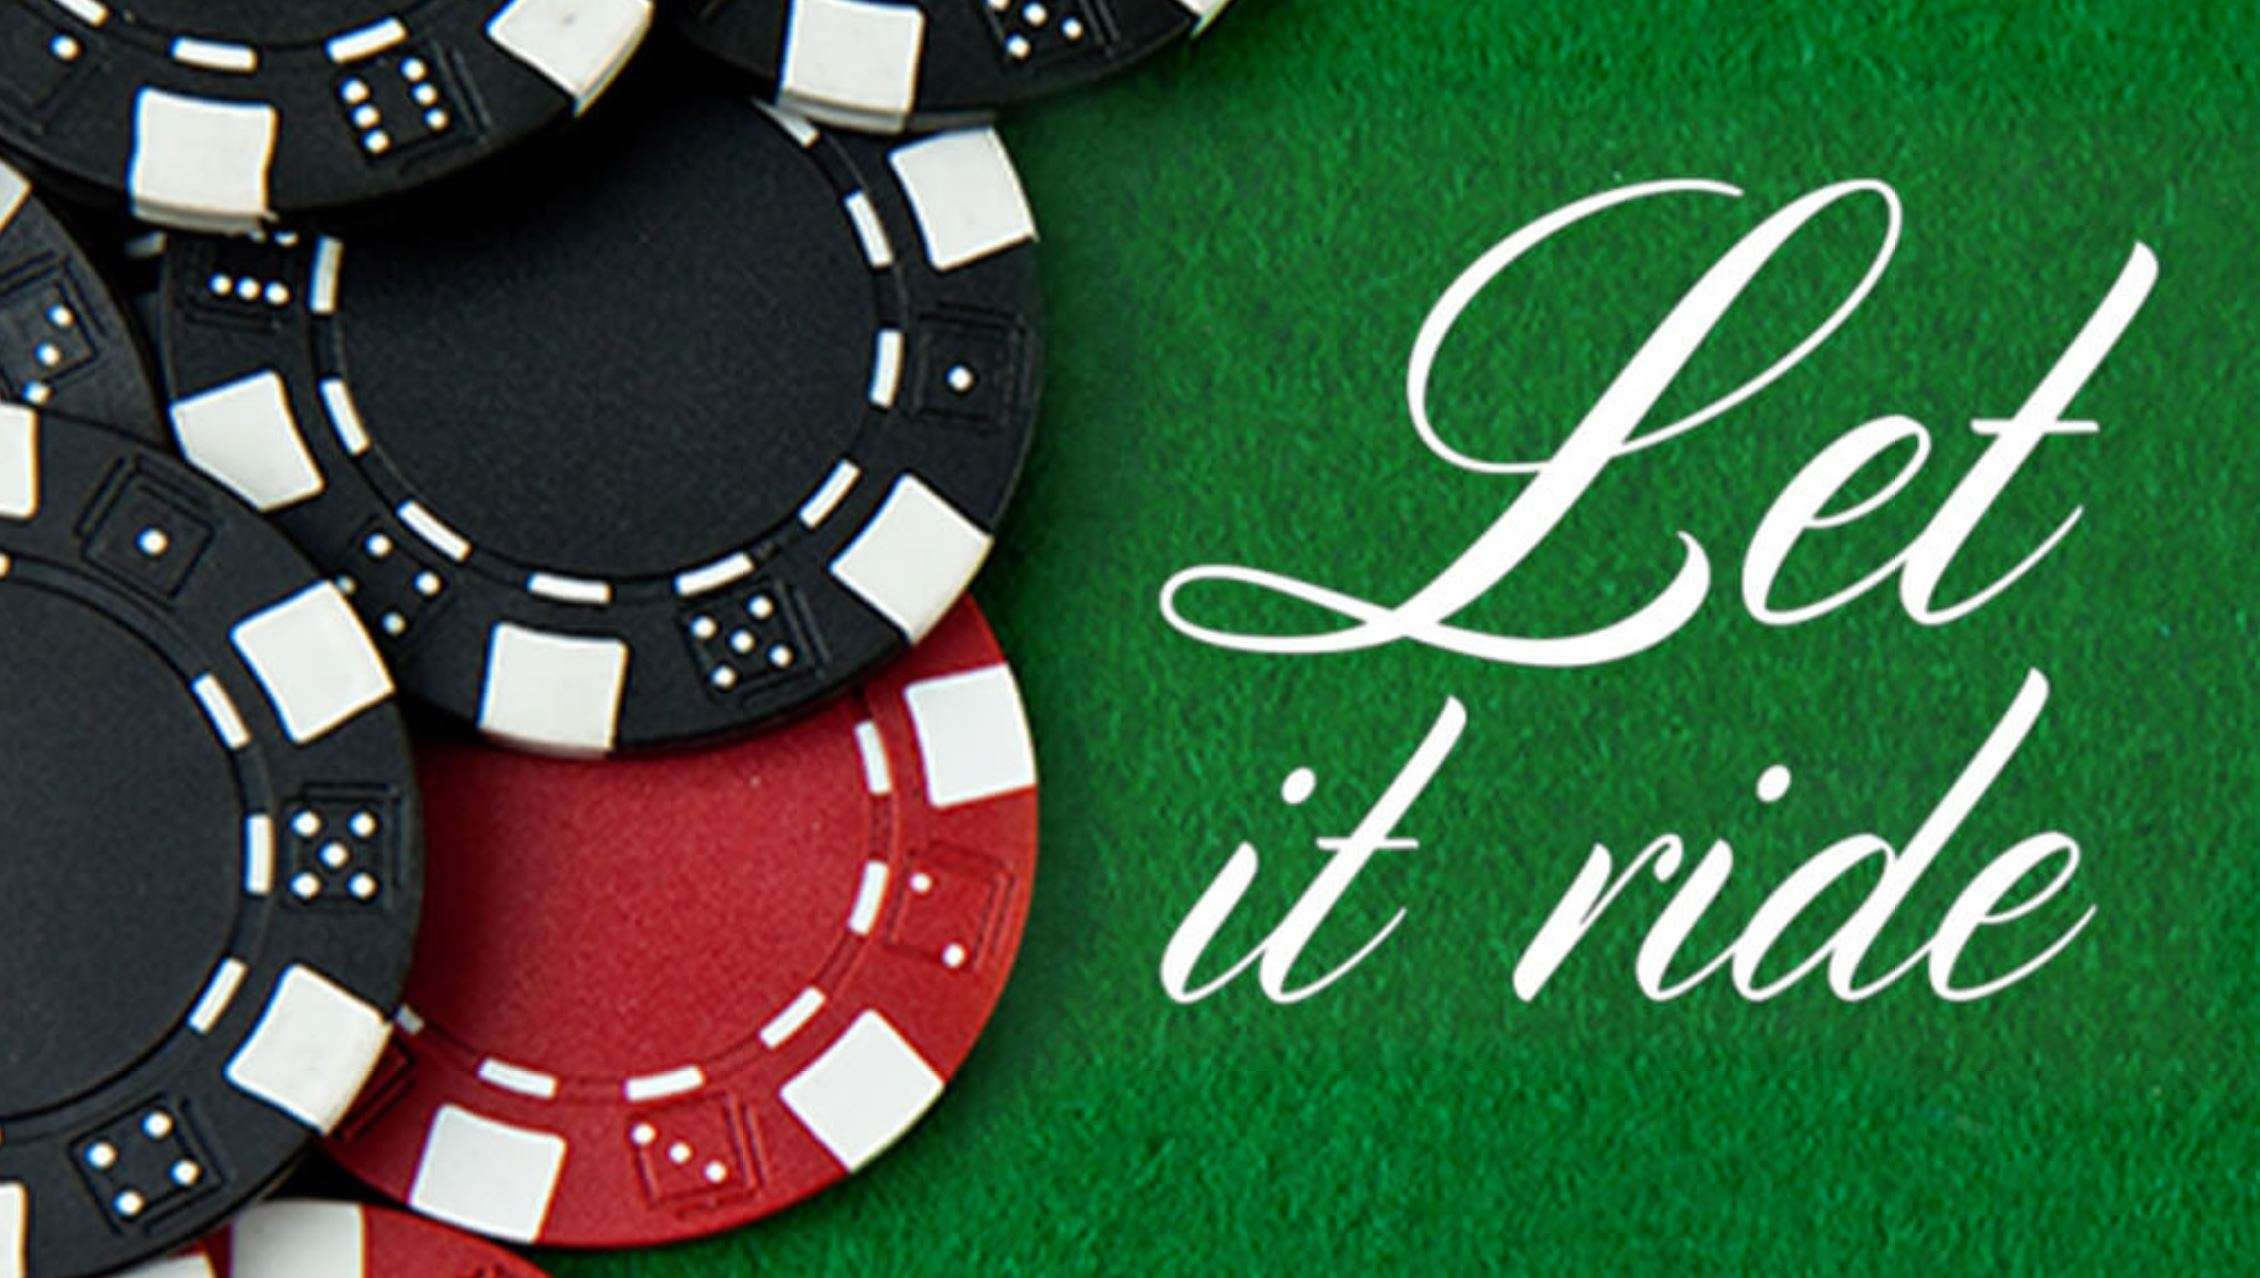 Let It Ride Poker - An Introduction to the Popular Online Game